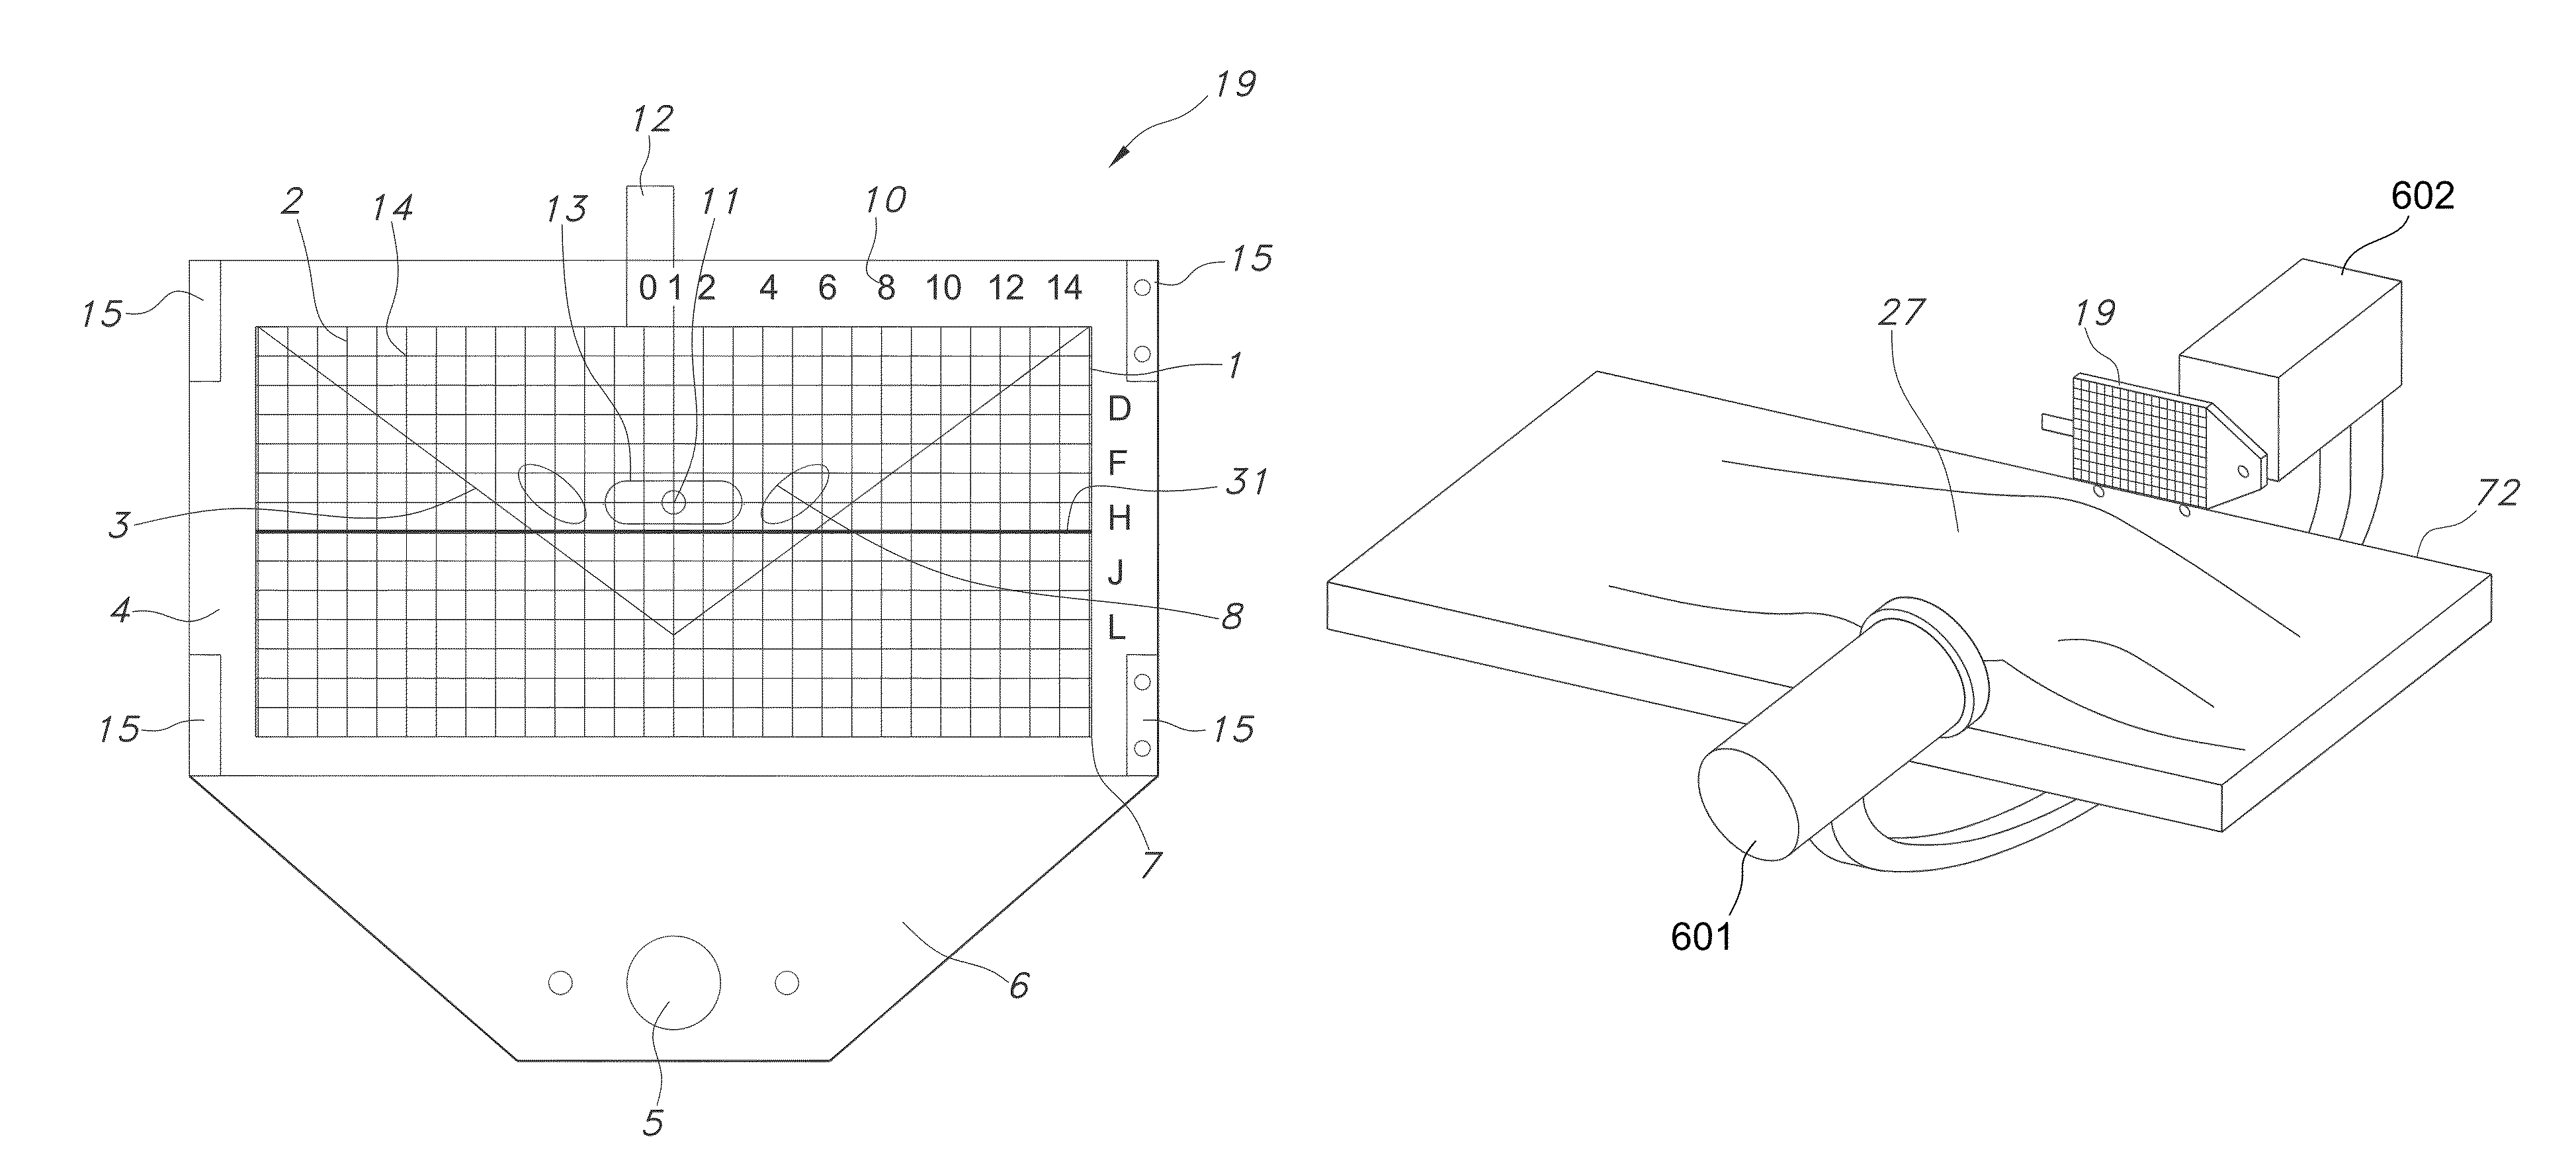 Grid patterned alignment plate for imaging apparatus and method of providing implant placement